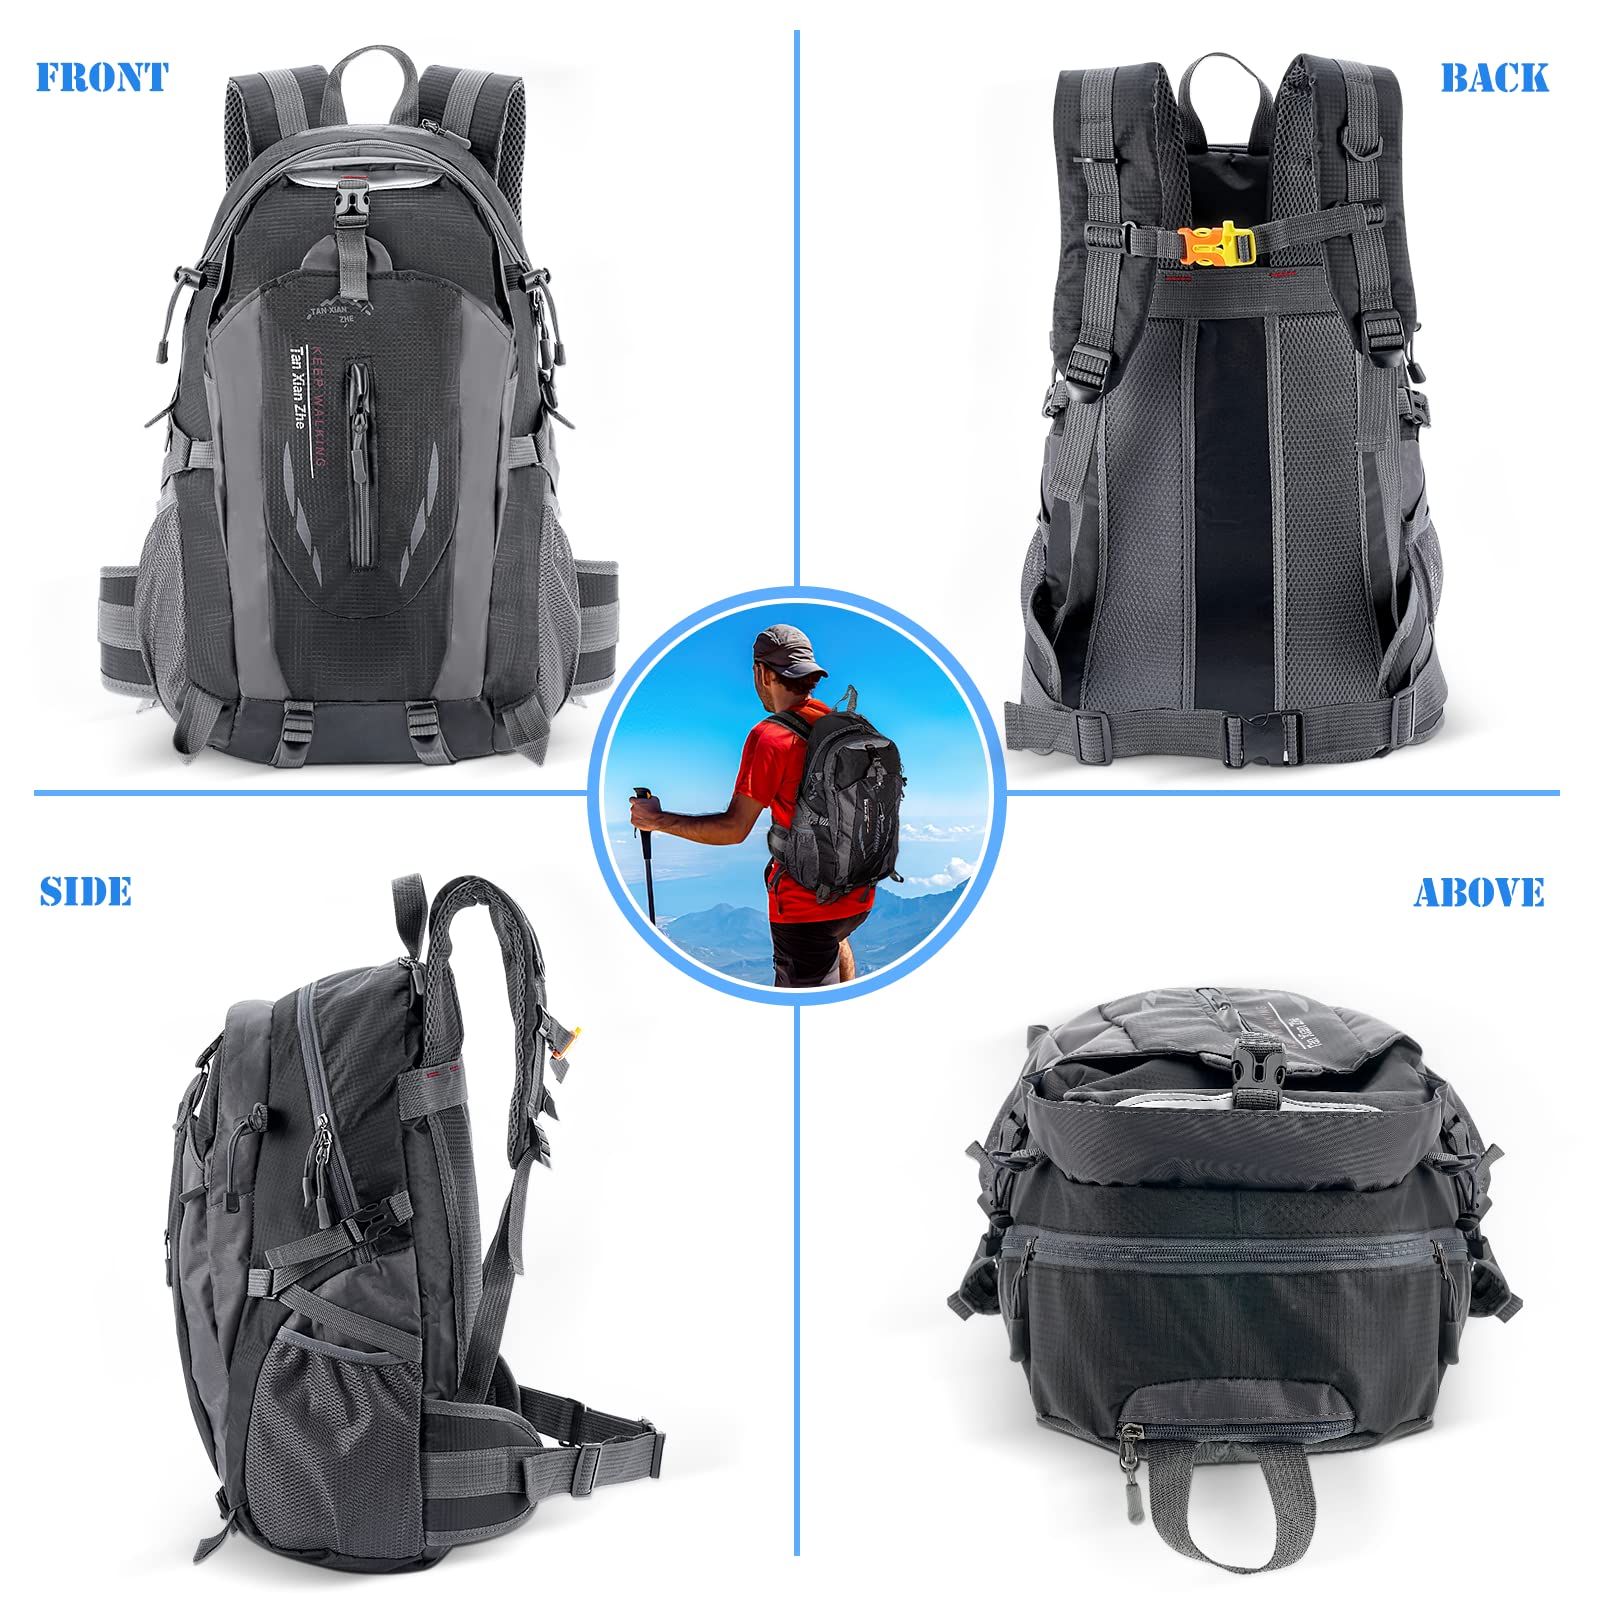 Number-one 40L Hiking Backpack Lightweight Breathable Hiking Daypack for Men Women Durable Waterproof Rucksack Outdoor Sport Travel Bag for Camping Cycling Skiing Climbing Trekking Mountaineer (Black)